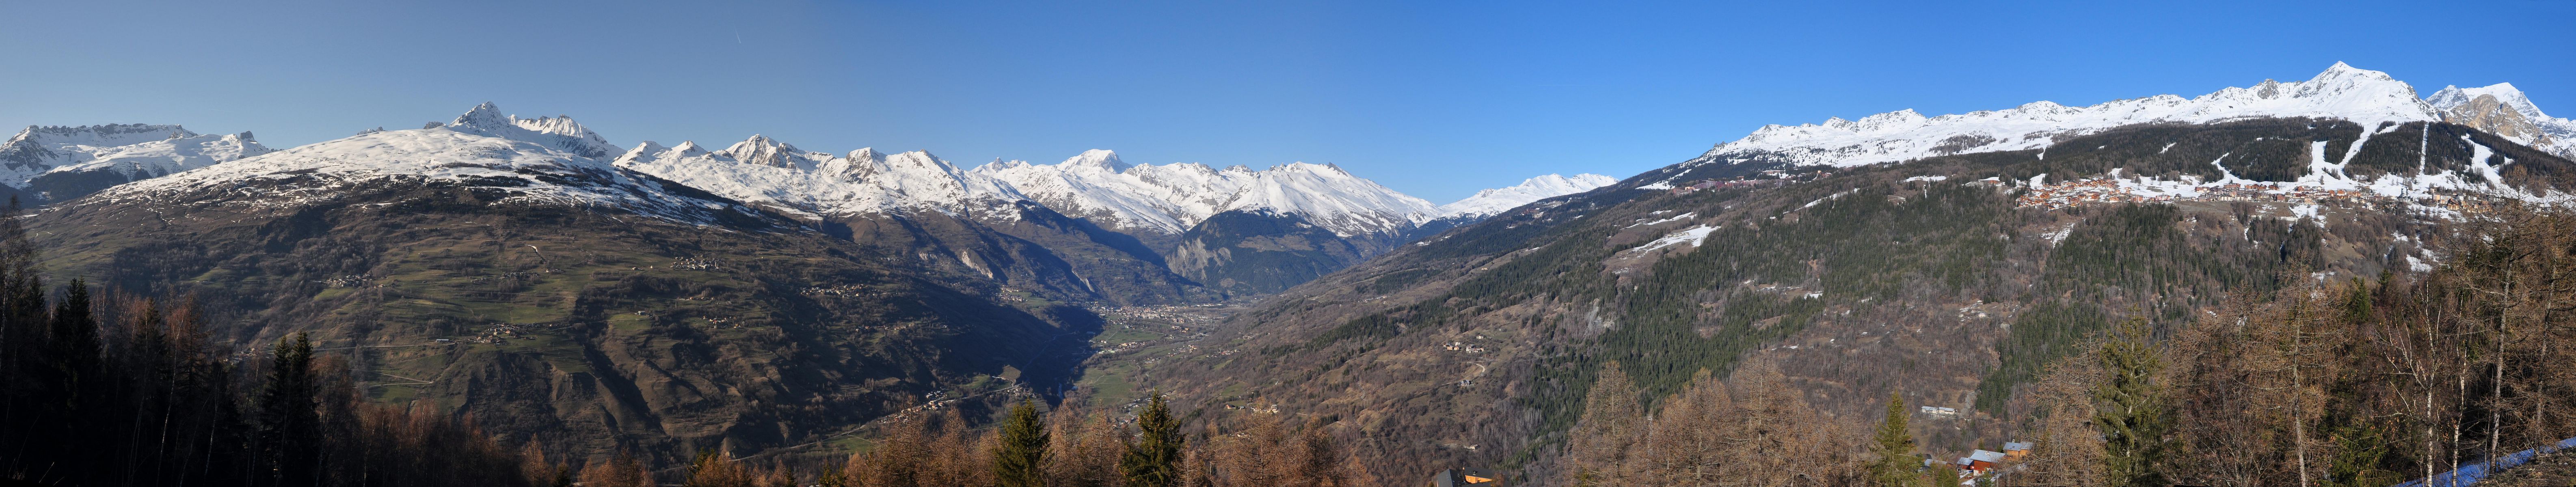 Mont Blanc, Valley of the Isere river and Les Arcs - France.jpg